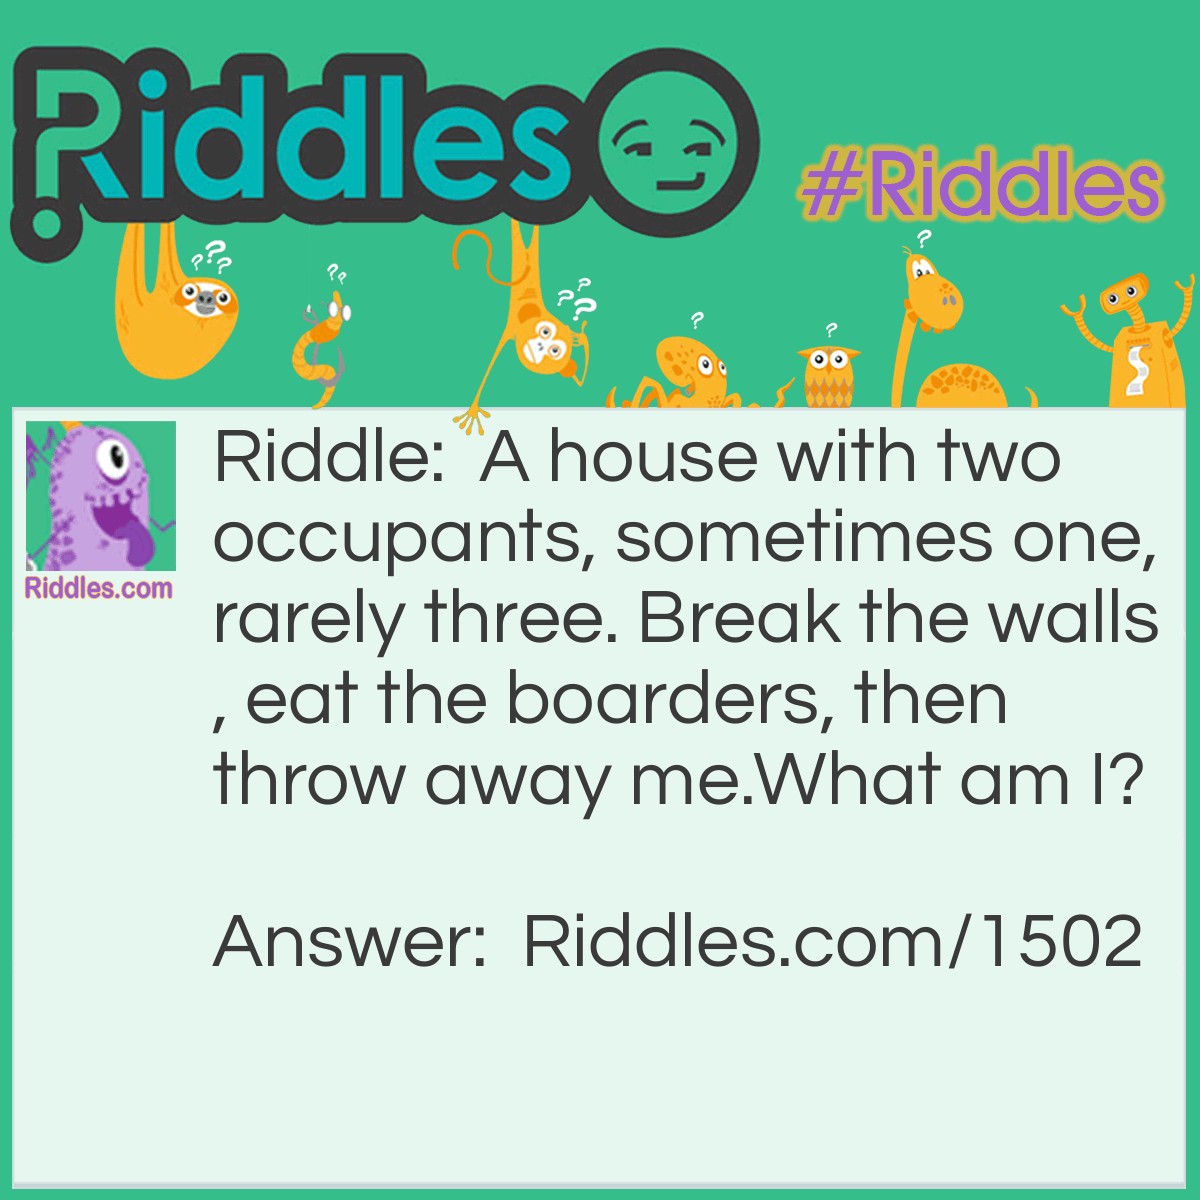 Riddle: A house with two occupants, sometimes one, rarely three. Break the walls, eat the boarders, then throw away me.
What am I? Answer: A Peanut.